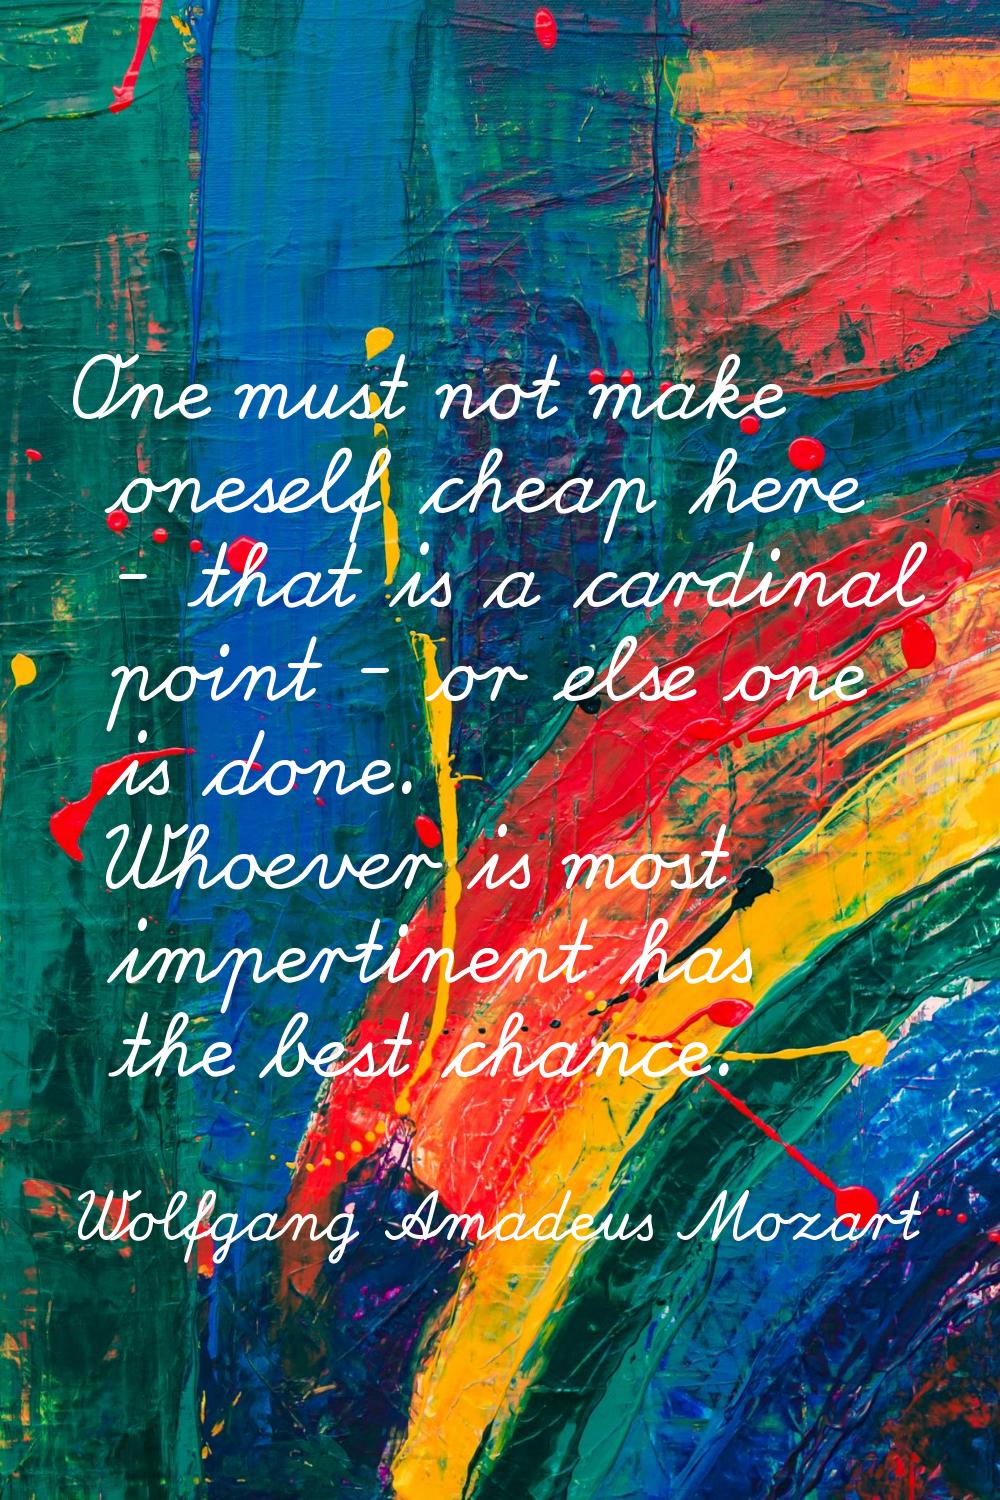 One must not make oneself cheap here - that is a cardinal point - or else one is done. Whoever is m